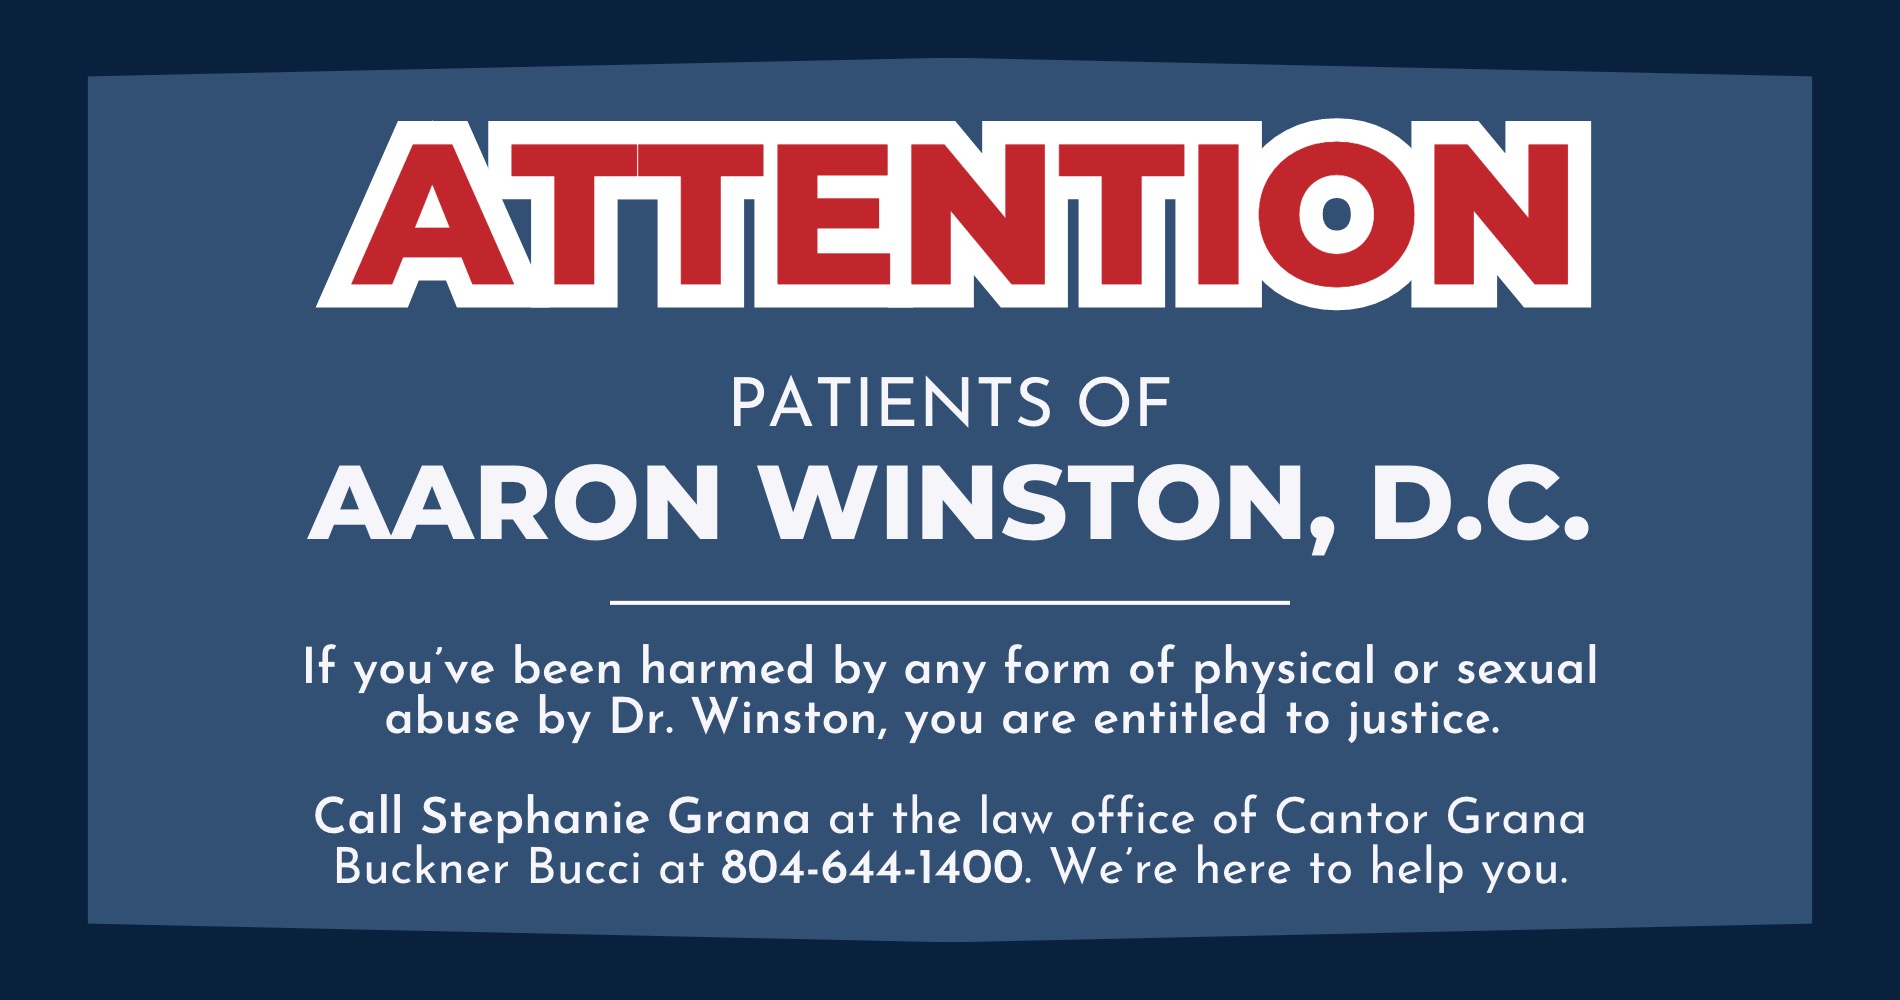 attention patients of aaron winston, d.c. if youve been harmed by any form of physical or sexual abuse by dr winston, you are entitled to justice